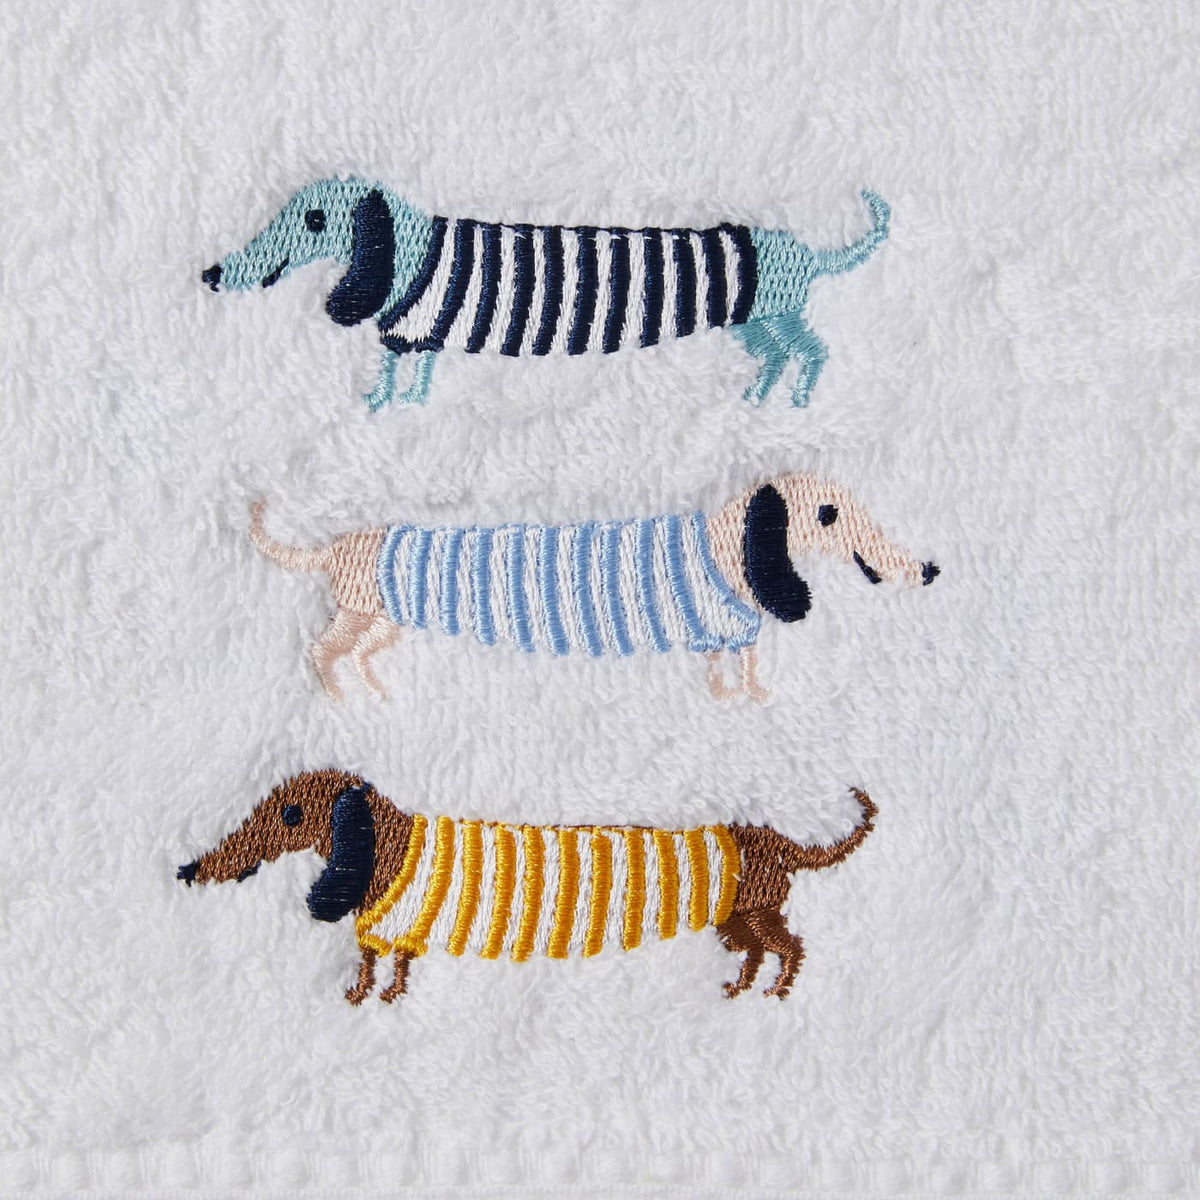 Jiggle &amp; Giggle Towel &amp; Face Washer Set in Organza Bag - Dachshunds - Dachshunds - BATHTIME &amp; CHANGING - TOWELS/WASHERS